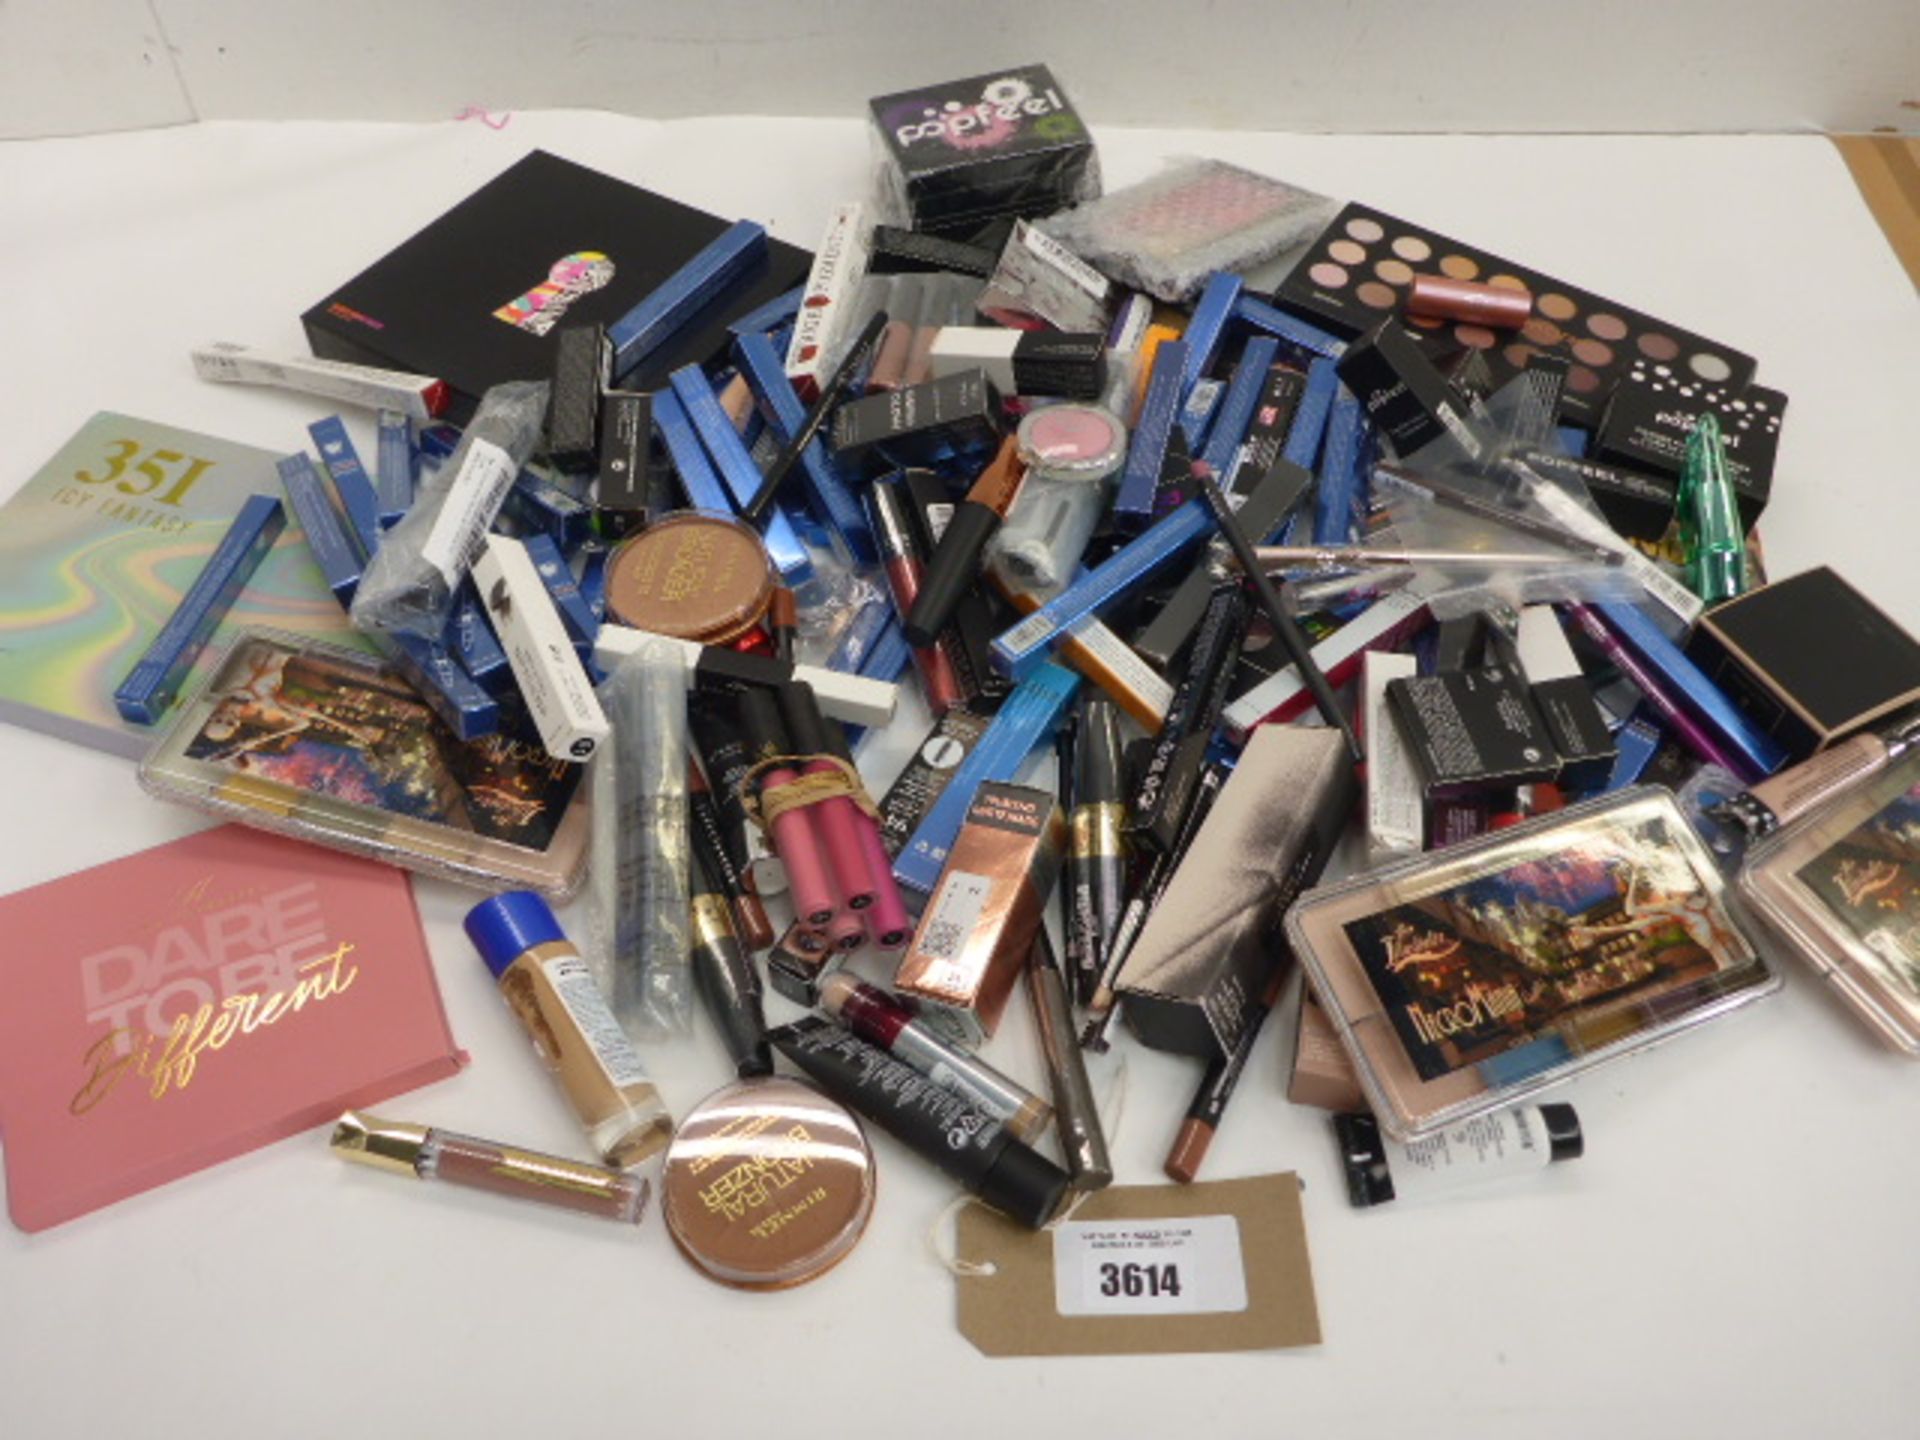 Large selection of assorted cosmetics including Rimmel, Max Factor, Fenty and others